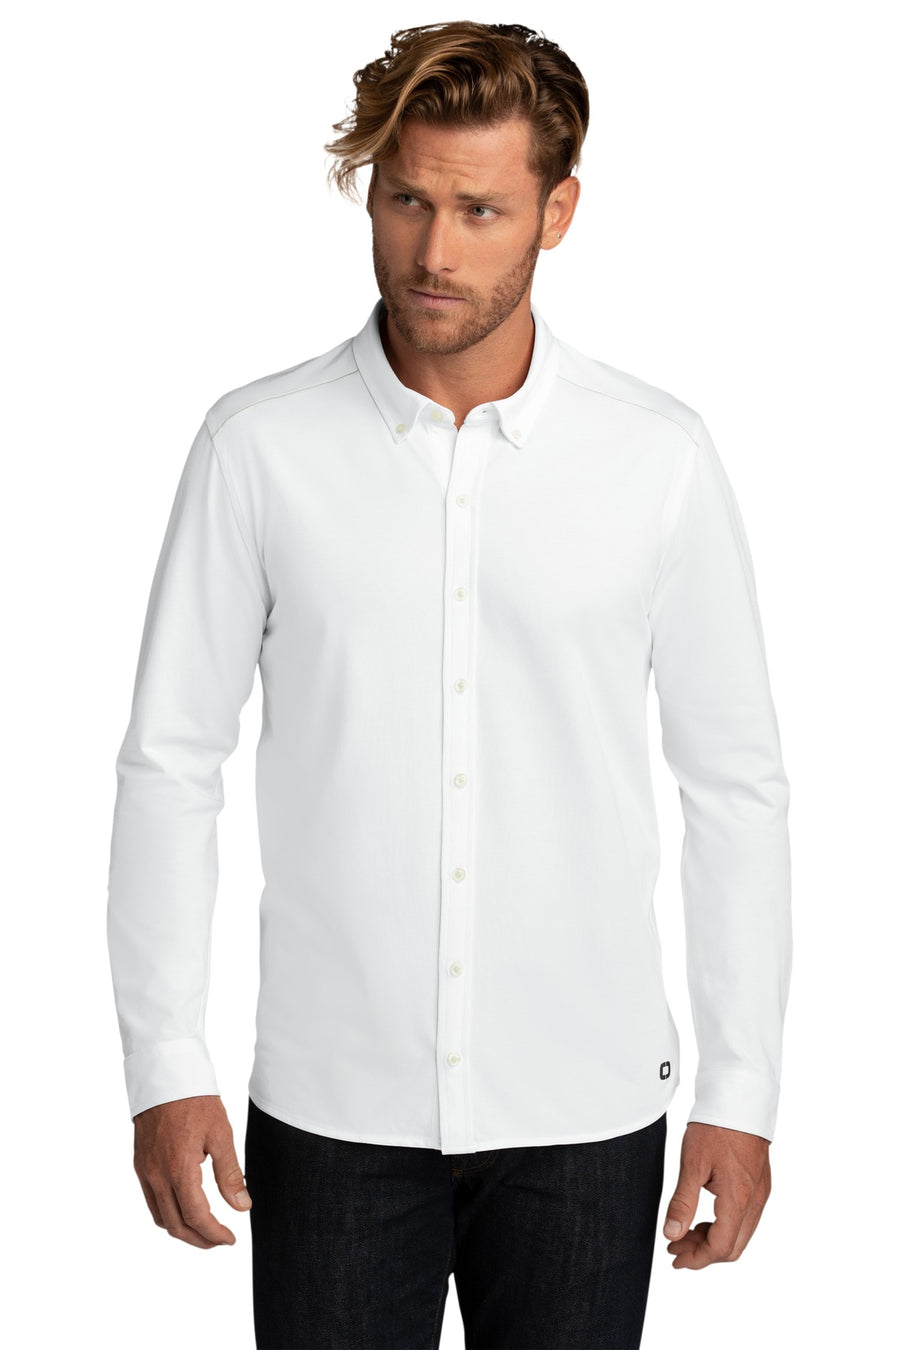 OGIO Code Stretch Long Sleeve Button-Up.